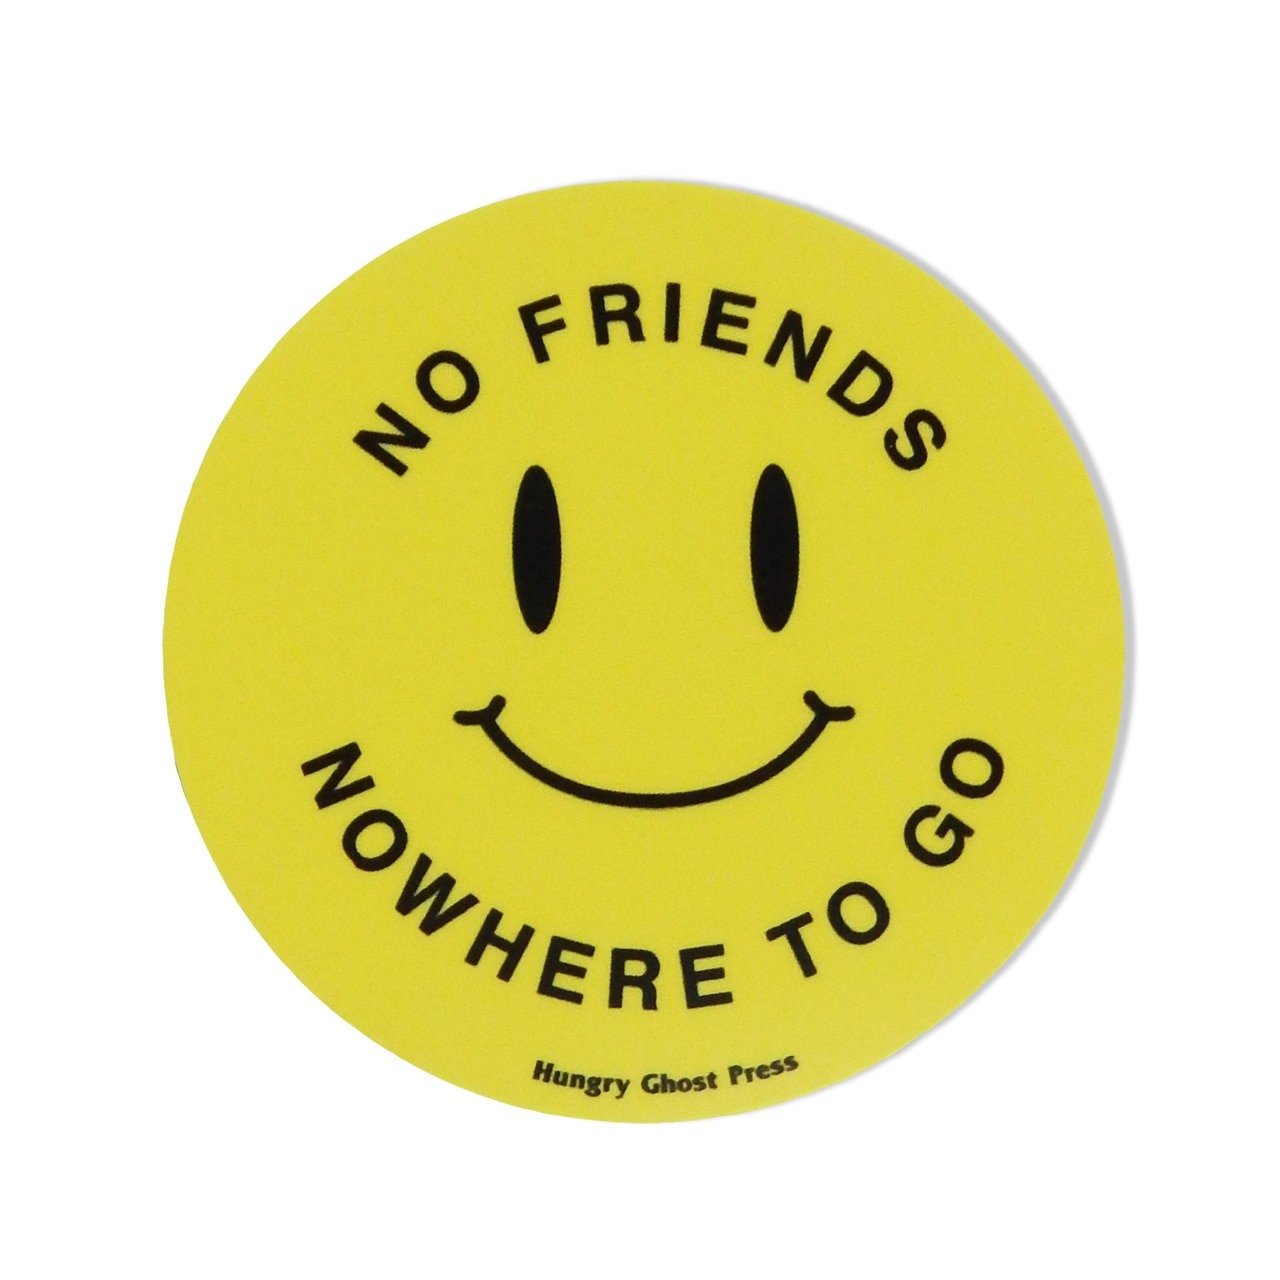 Yellow vinyl sticker with a happy face and the words “NO FRIENDS NOWHERE TO GO” written curved around the face